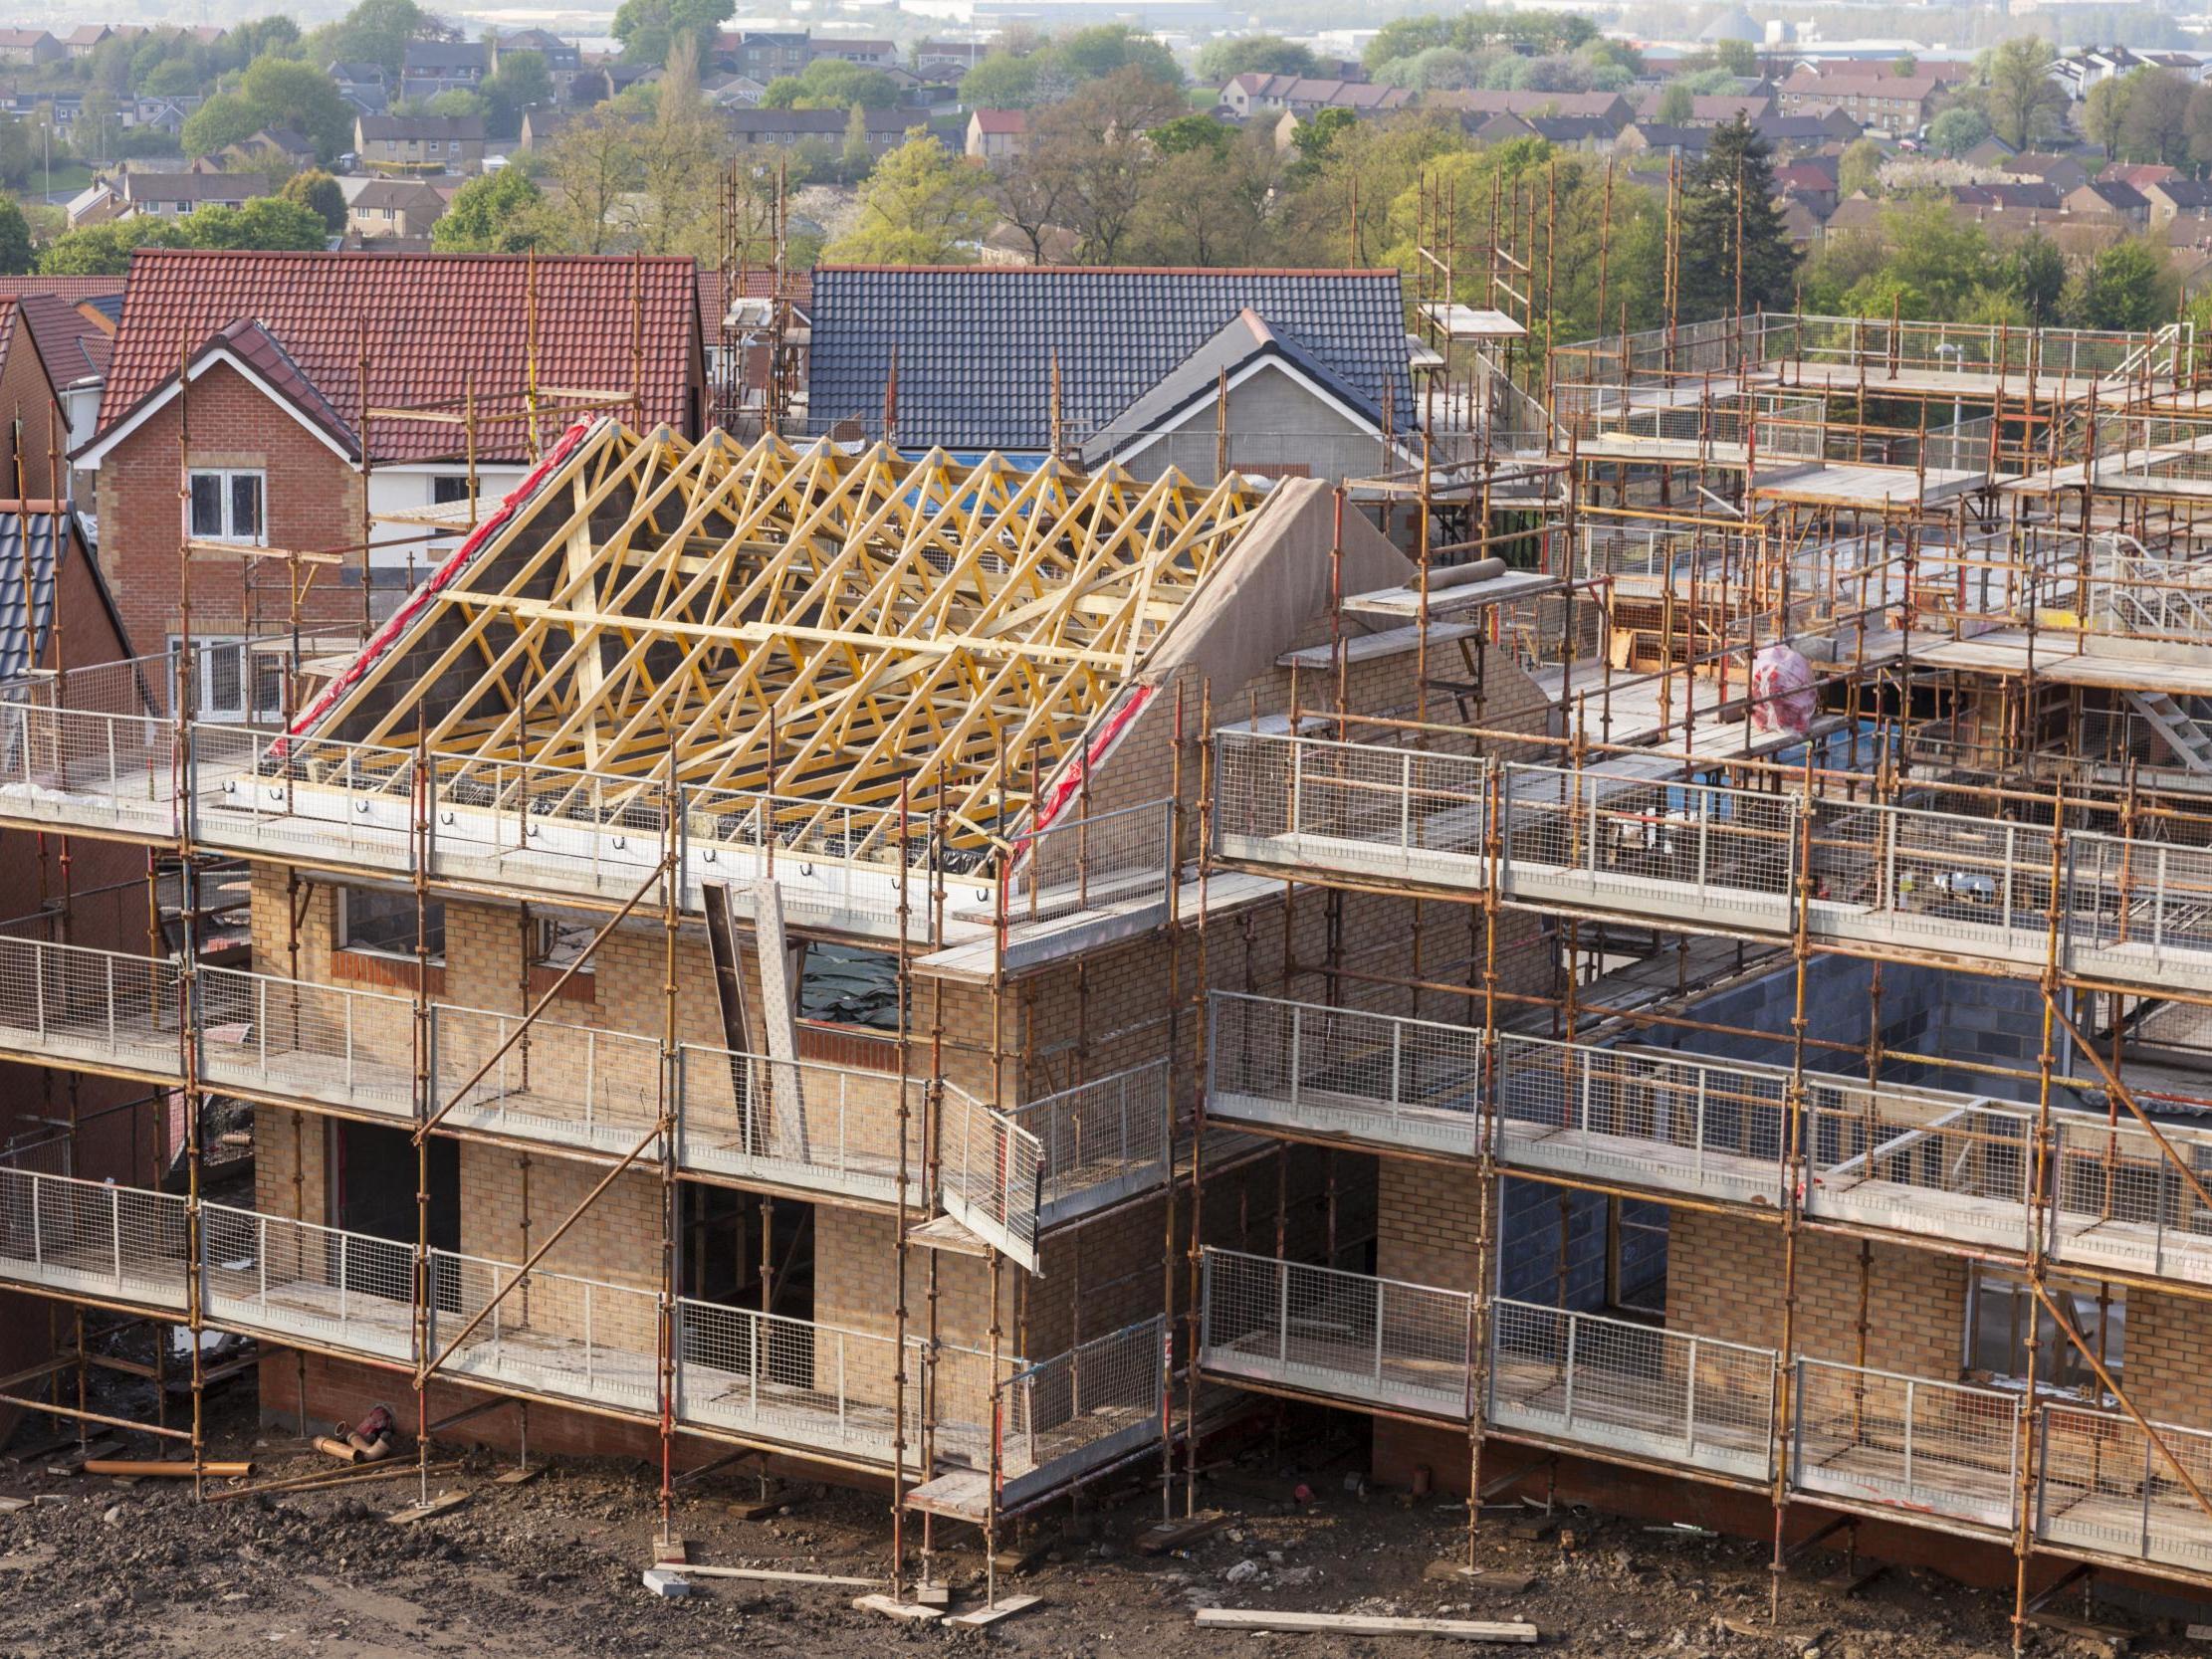 Developers are legally bound to hand over funds to obtain planning permission